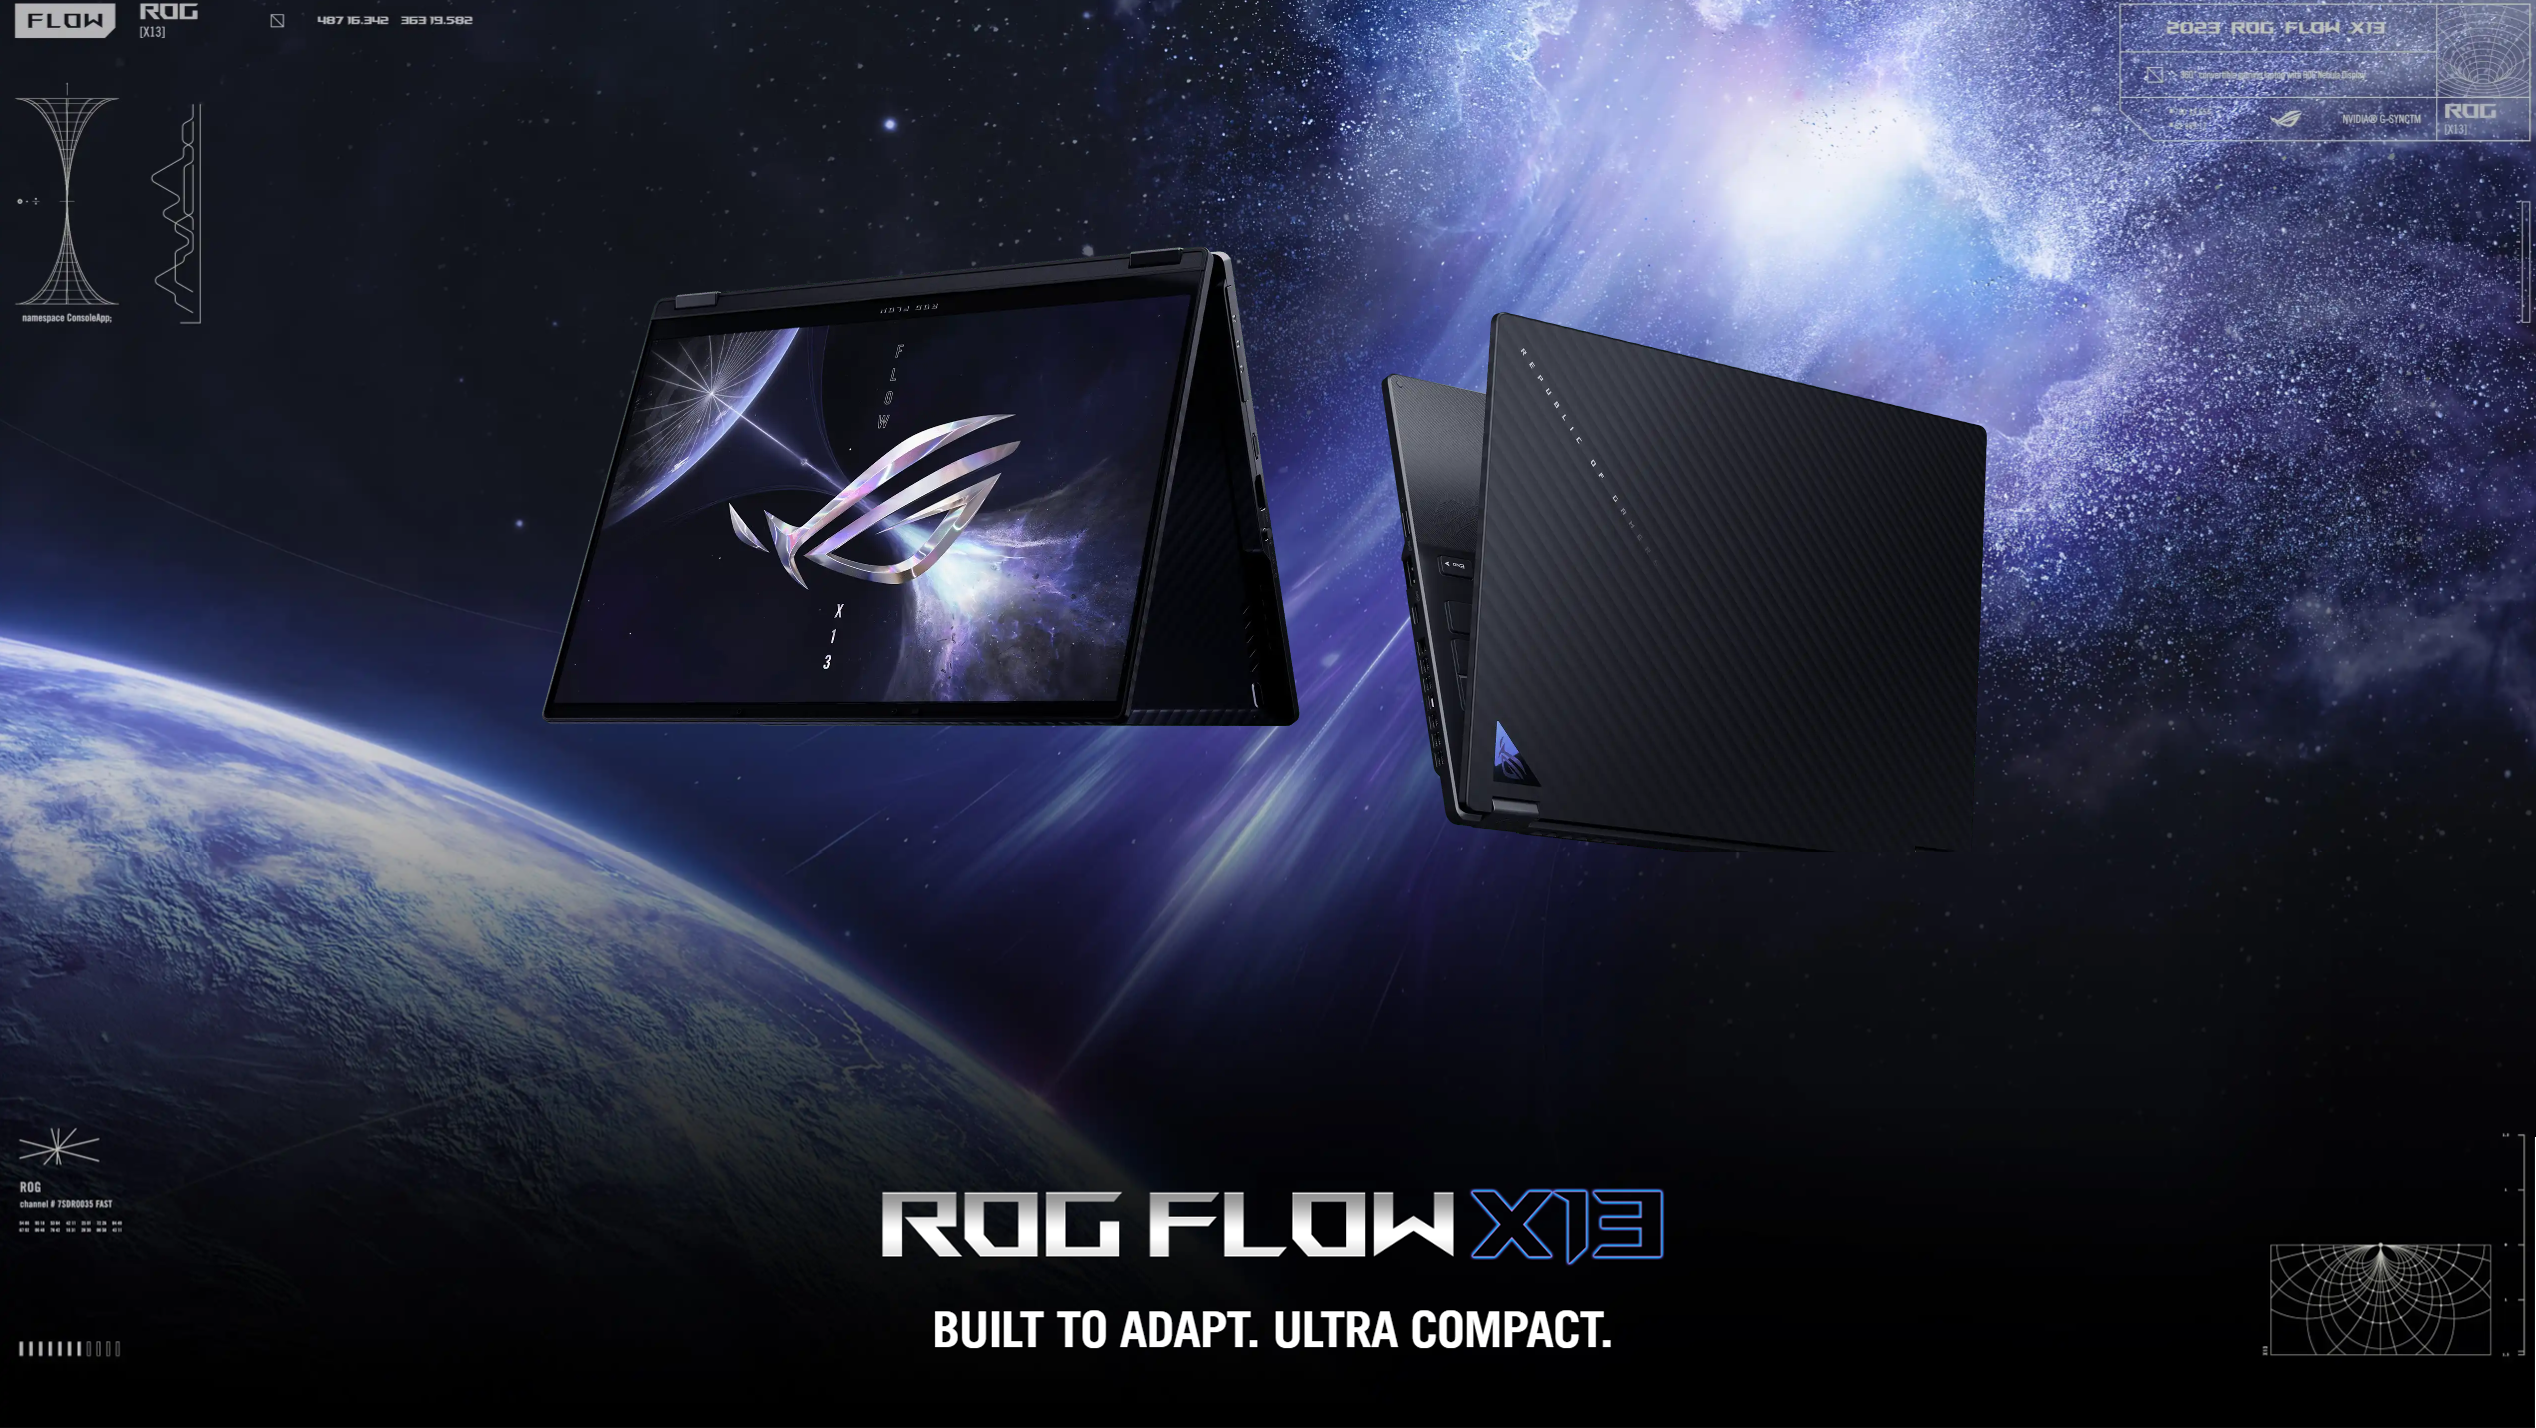 ROG FLOW X13 BUILT TO ADAPT. ULTRA COMPACT.